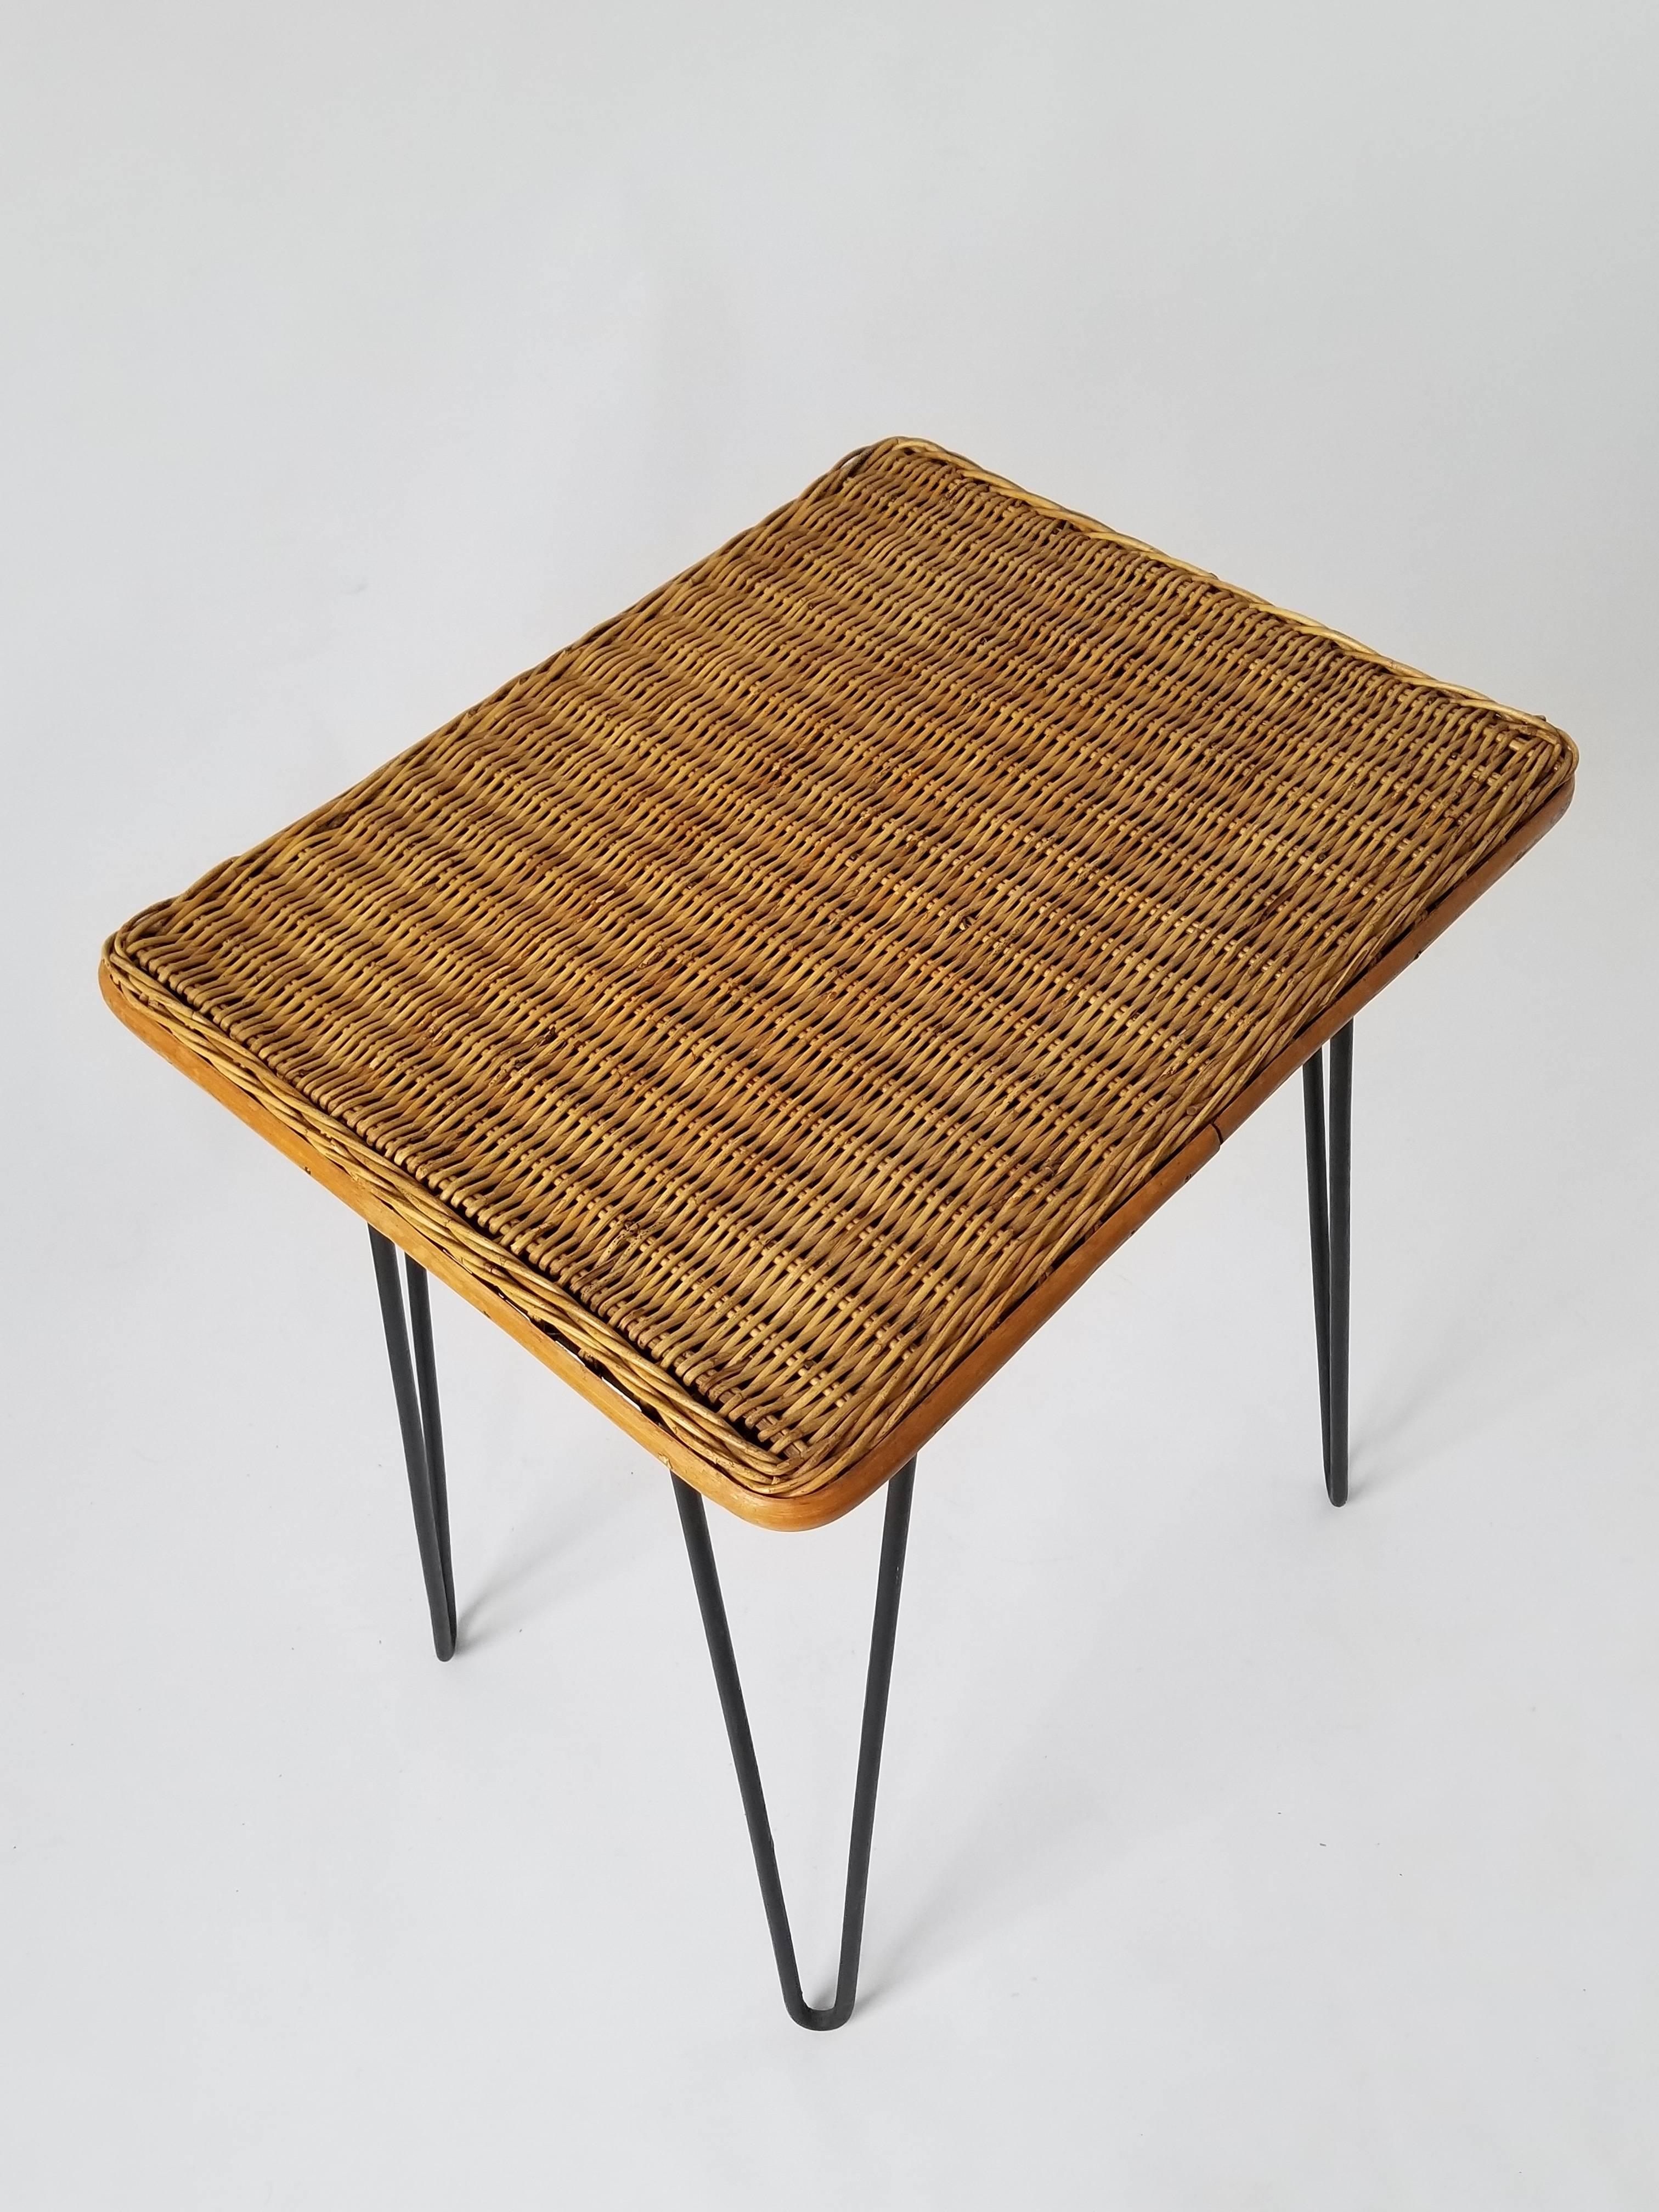 American 1950s Wicker Side Table with Hair Pin Legs, USA